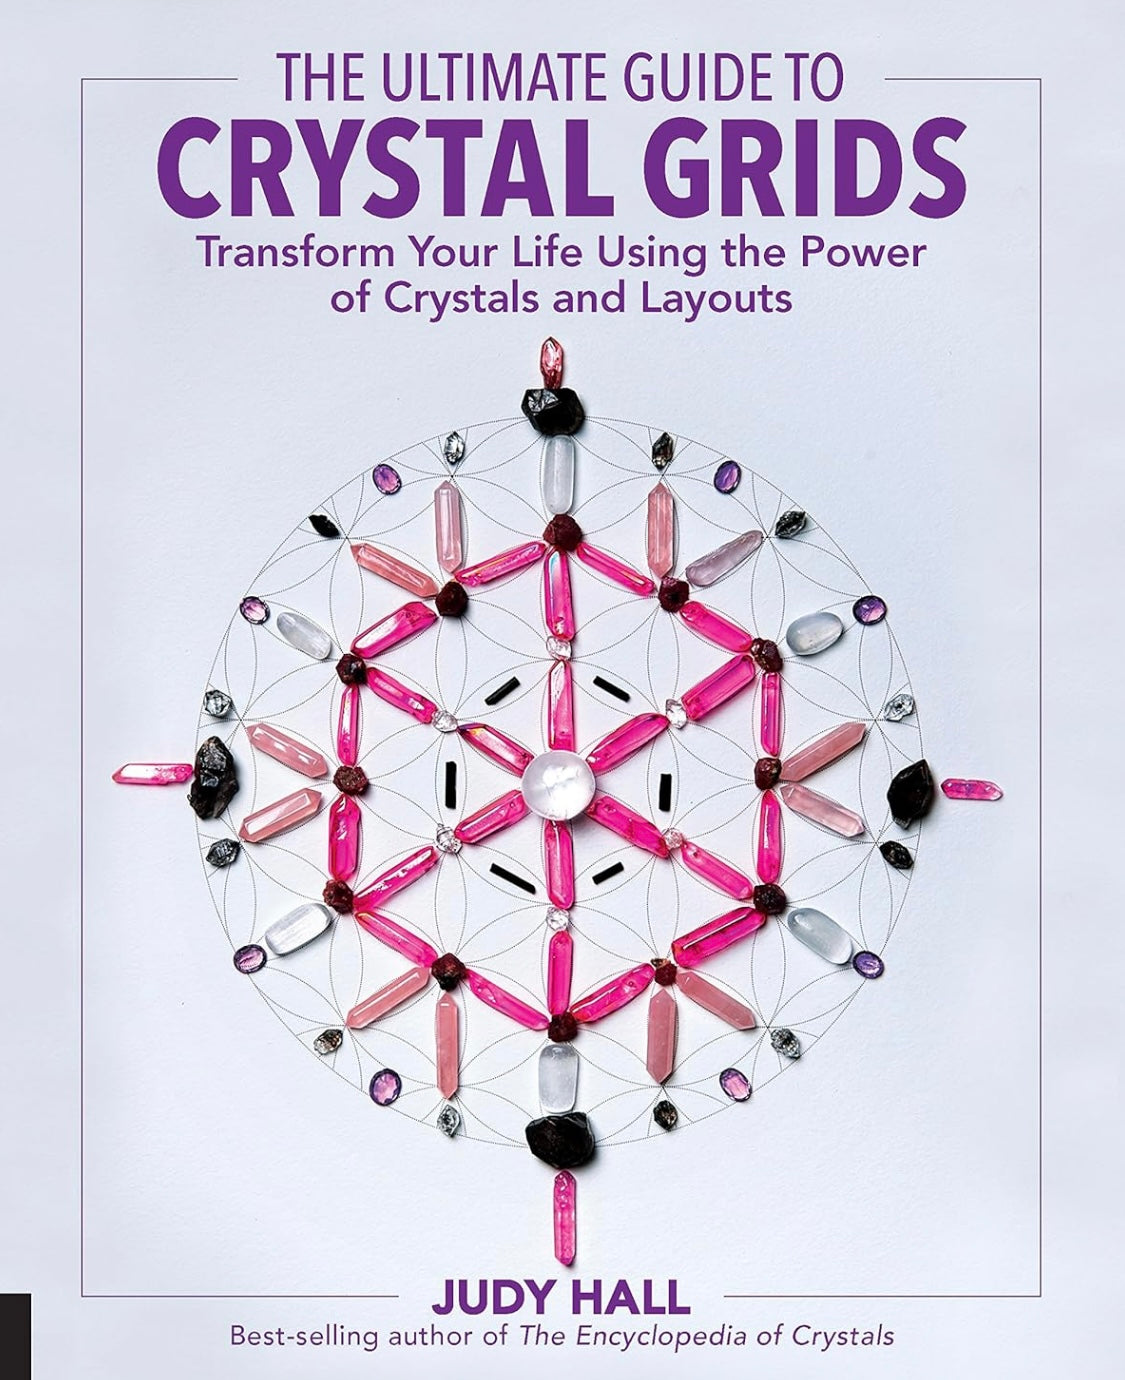 The Ultimate Guide to Crystal Grids: Transform Your Life Using the Power of Crystals and Layouts by Judy Hall